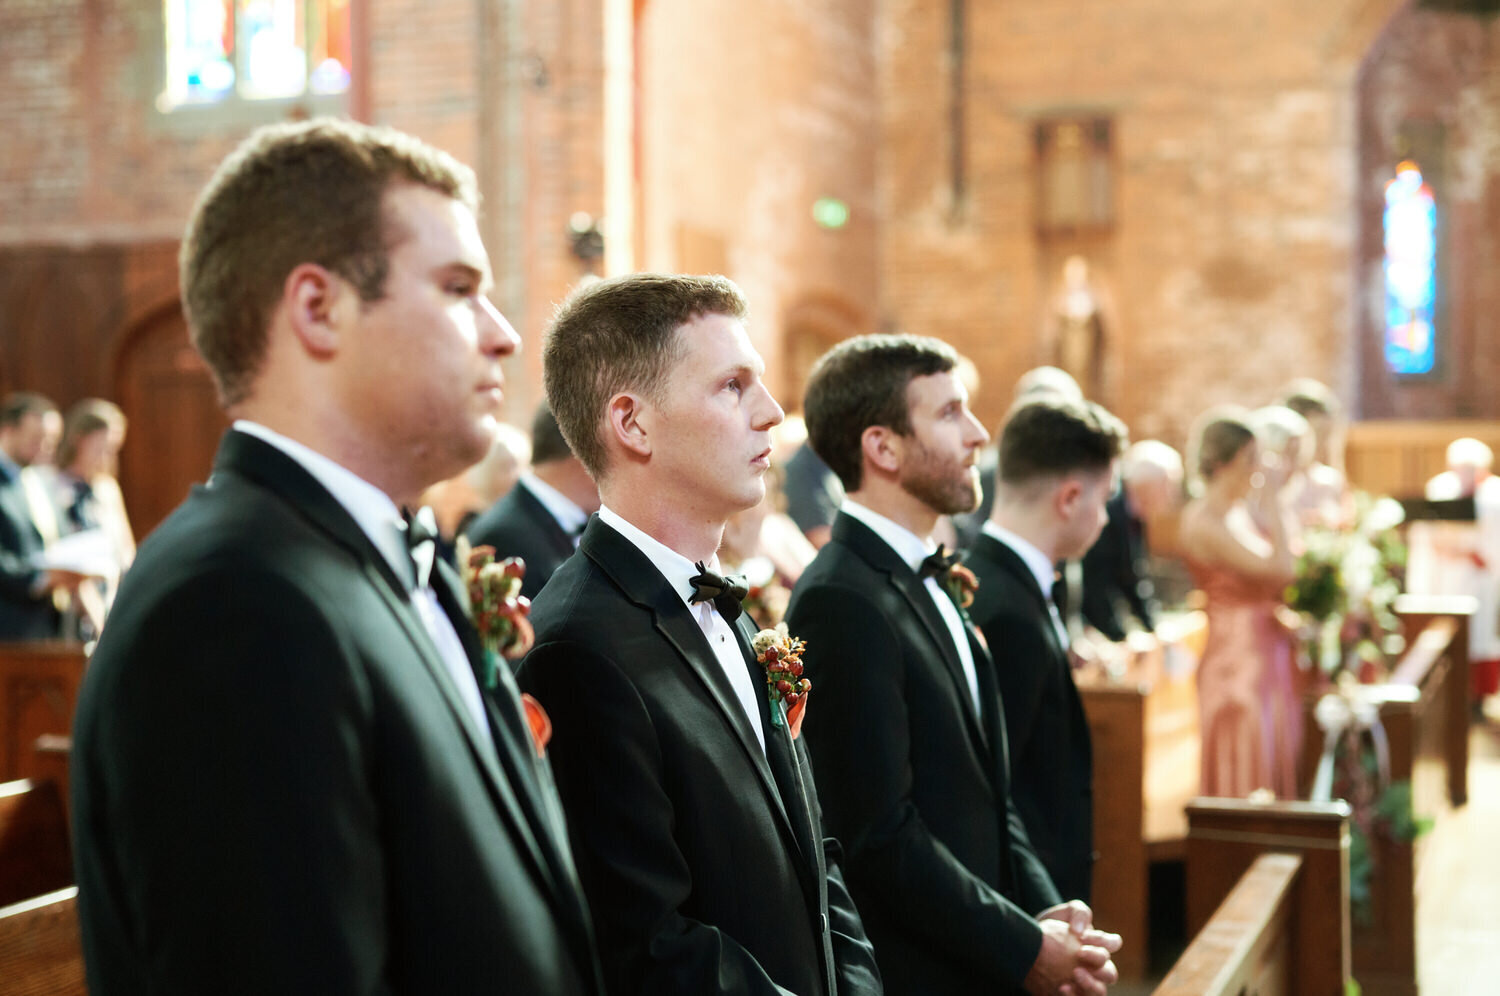 Groomsmen standing during the wedding ceremony inside a large catholic church